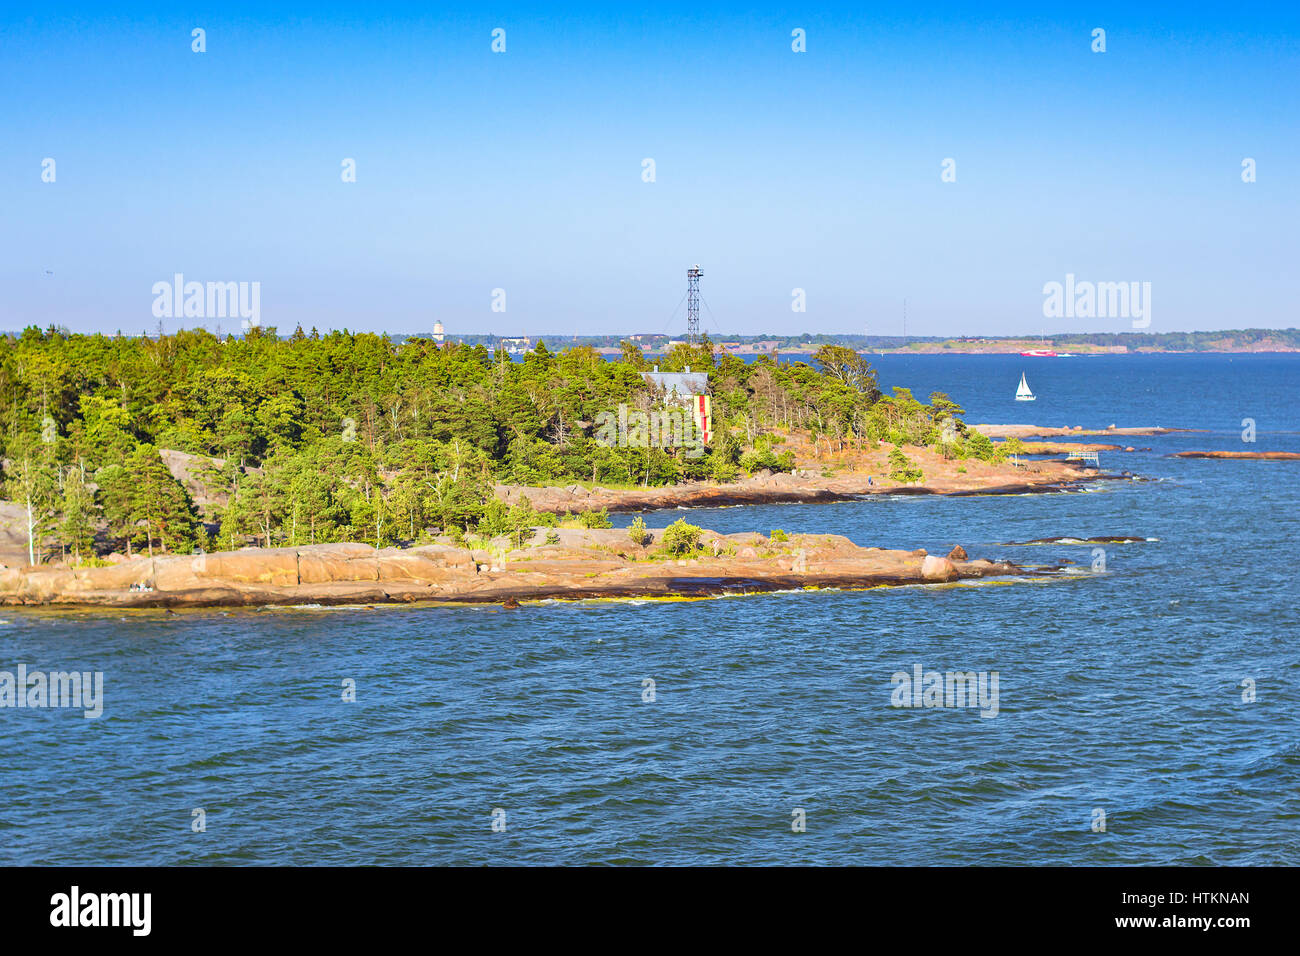 Stone beach with places for sunbathing, swimming and relaxing on a rocky island in Pihlajasaari Recreational Park. Scandinavian islands architecture i Stock Photo